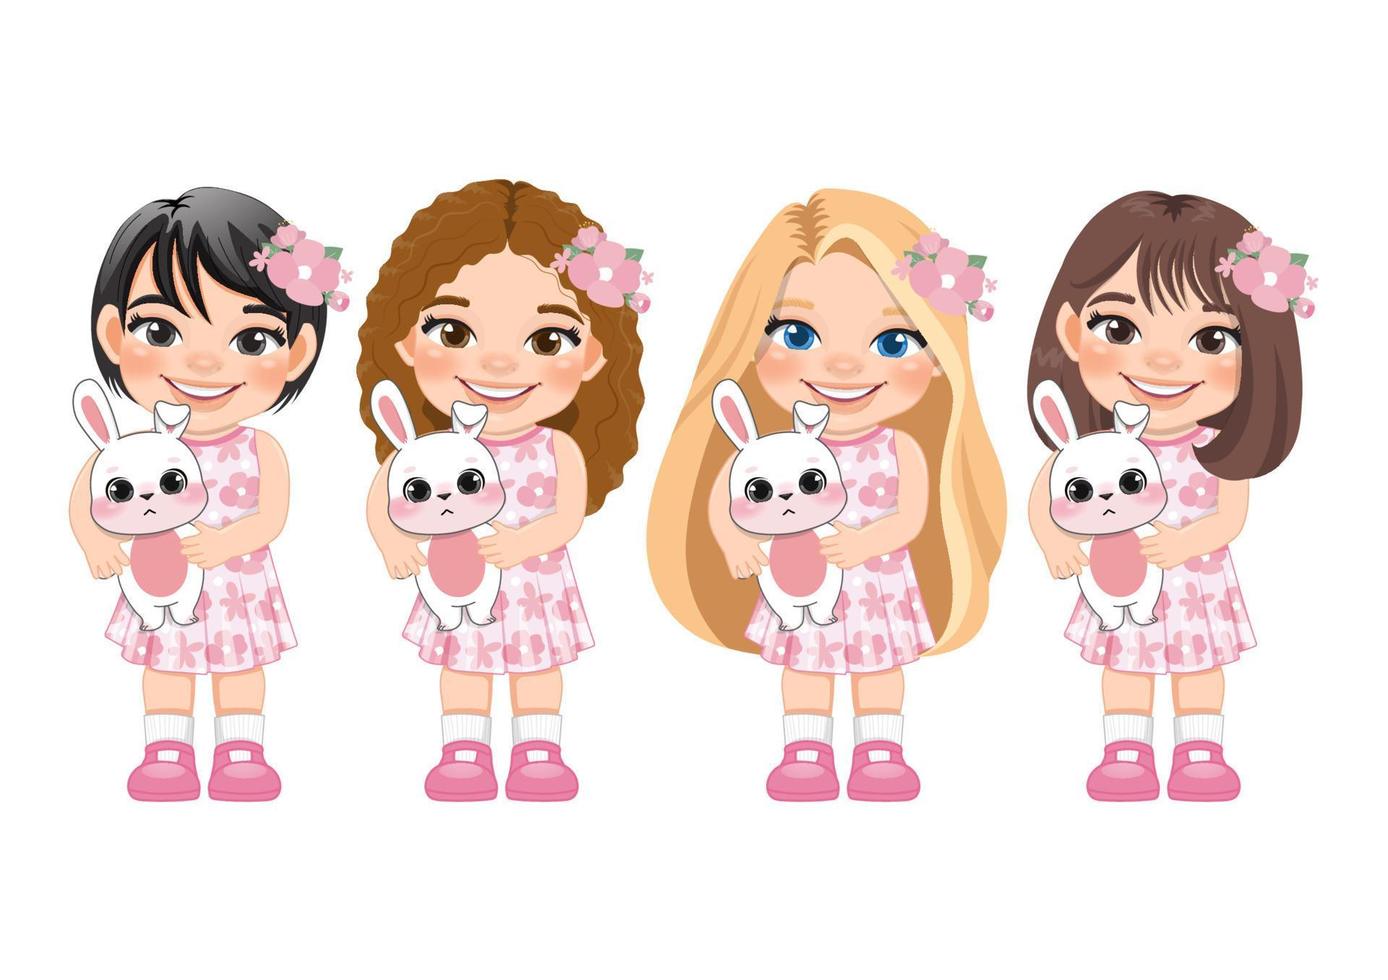 Happy Easter Day with Cute Girls Holding Bunny Cartoon Character vector